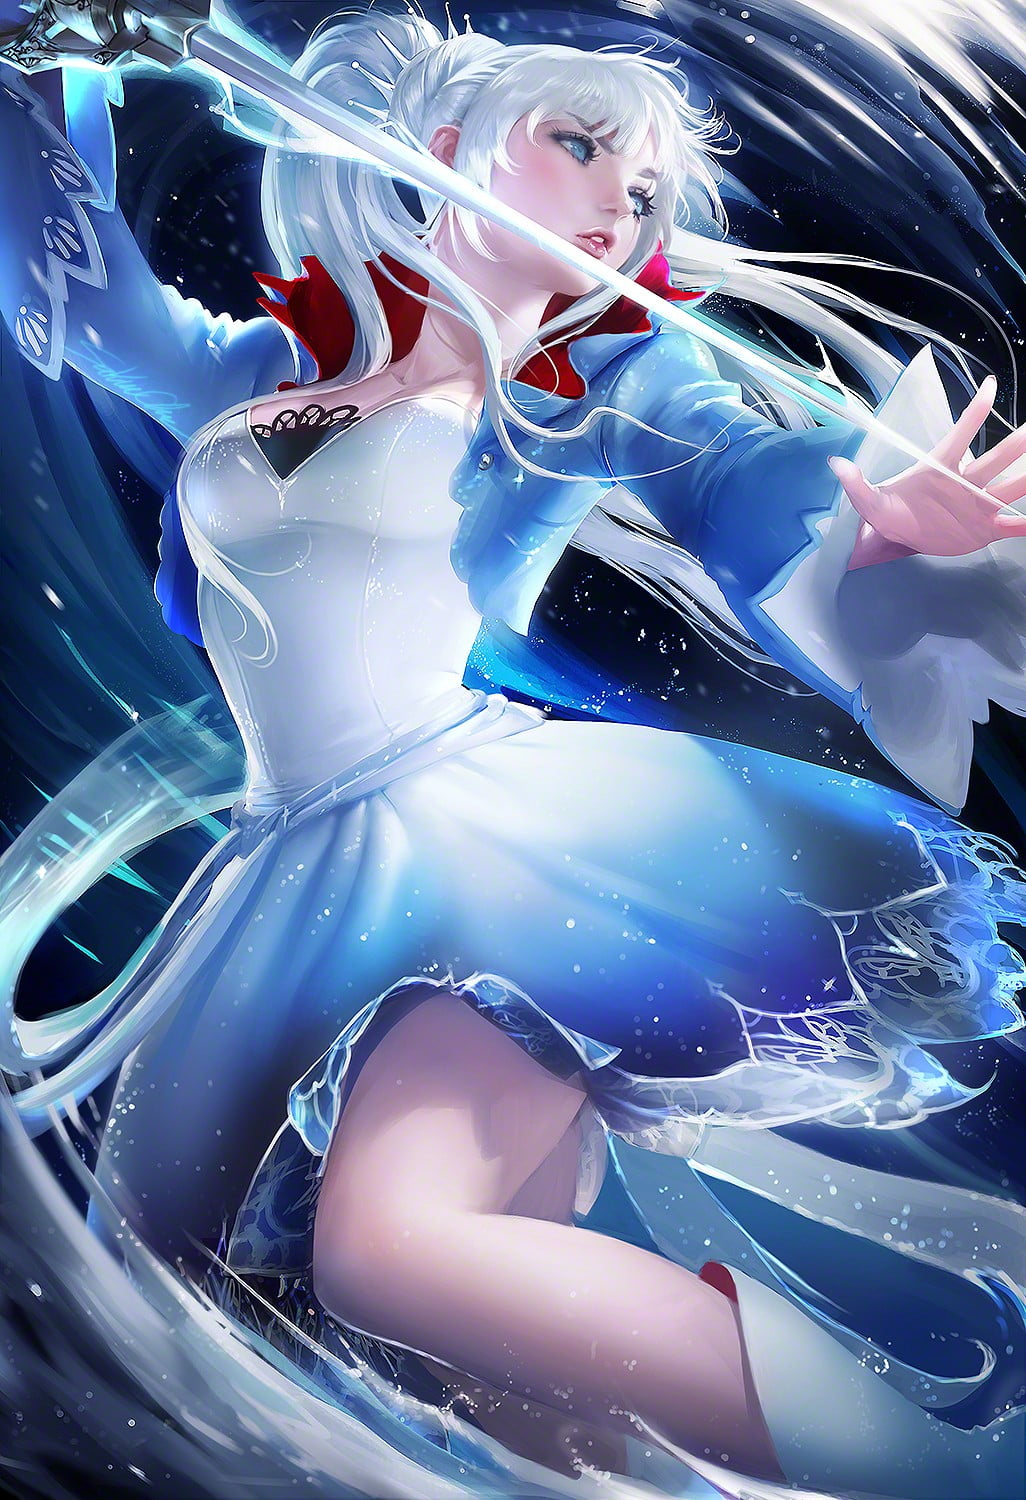 female anime character in blue and white dress, Sakimichan, RWBY, Weiss Sch...